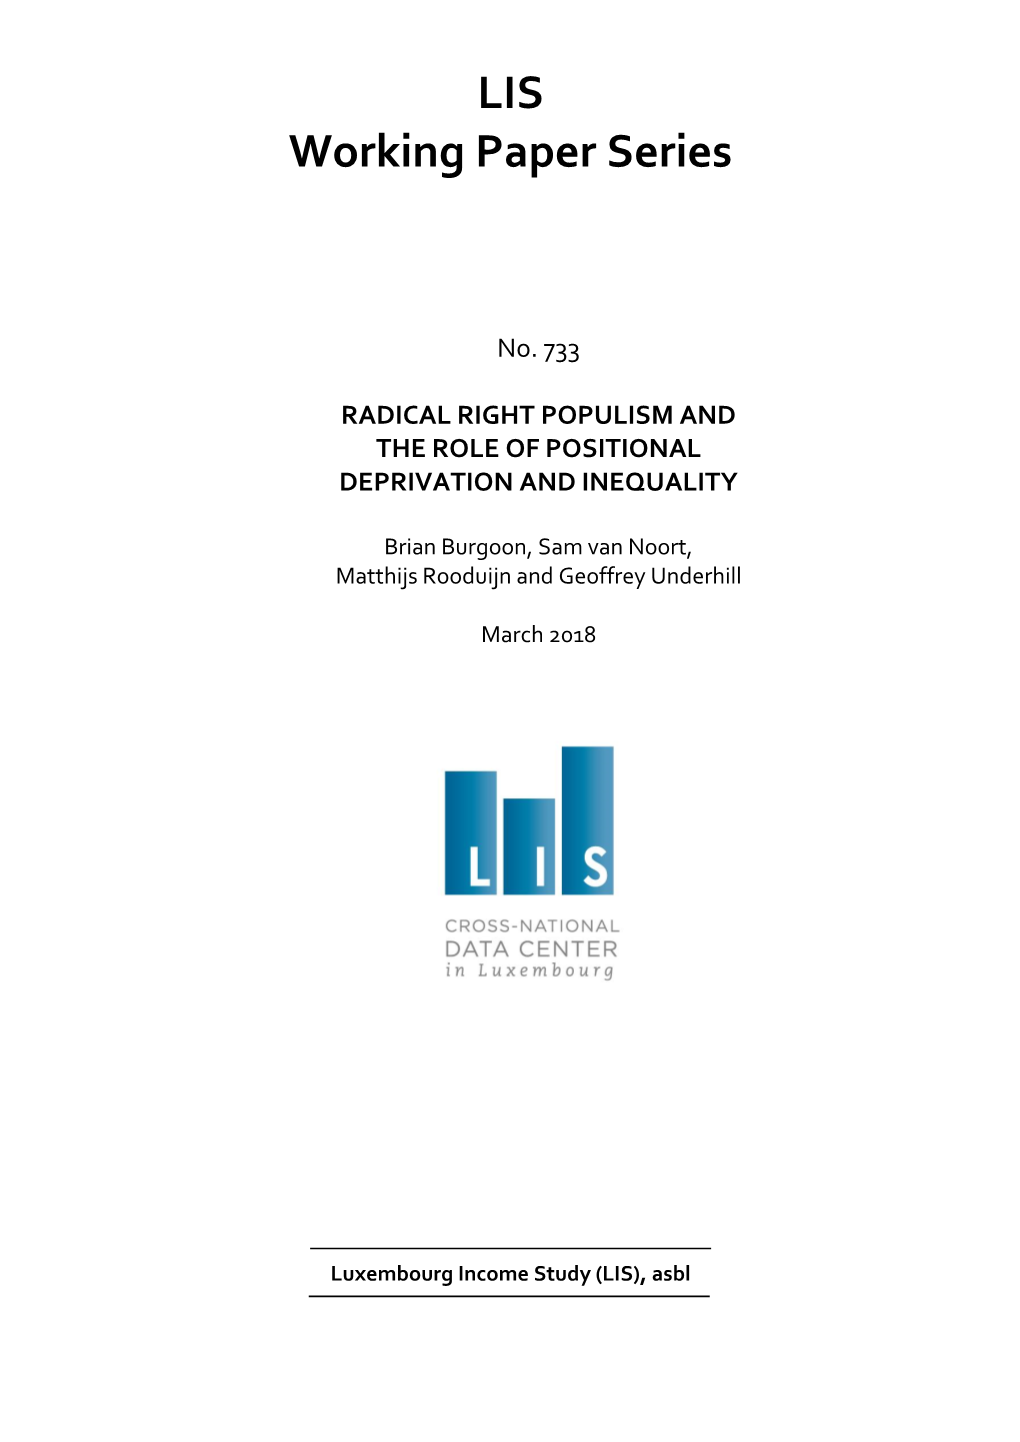 Radical Right Populism and the Role of Positional Deprivation and Inequality